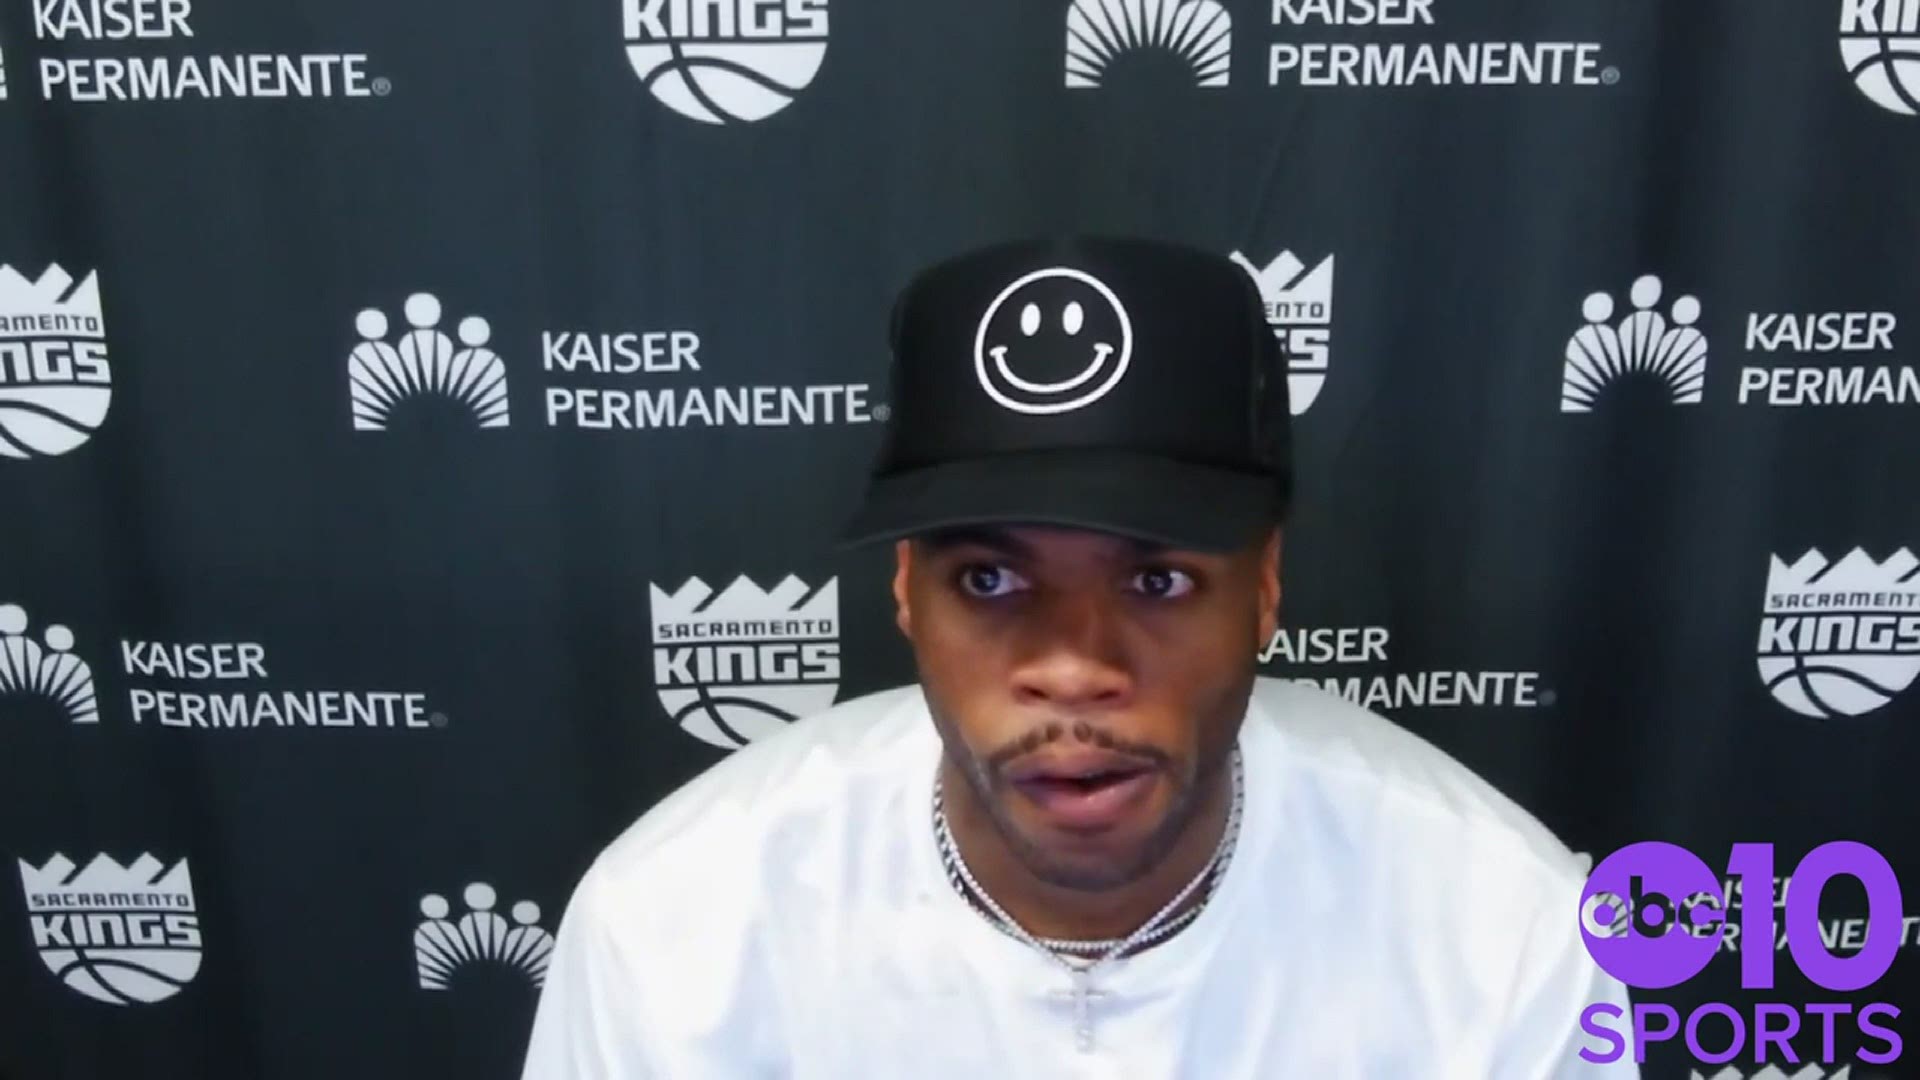 Buddy Hield talks about his season scoring high 29-point performance and the Kings' improved defensive effort, in Wednesday's win over the Magic in Orlando.